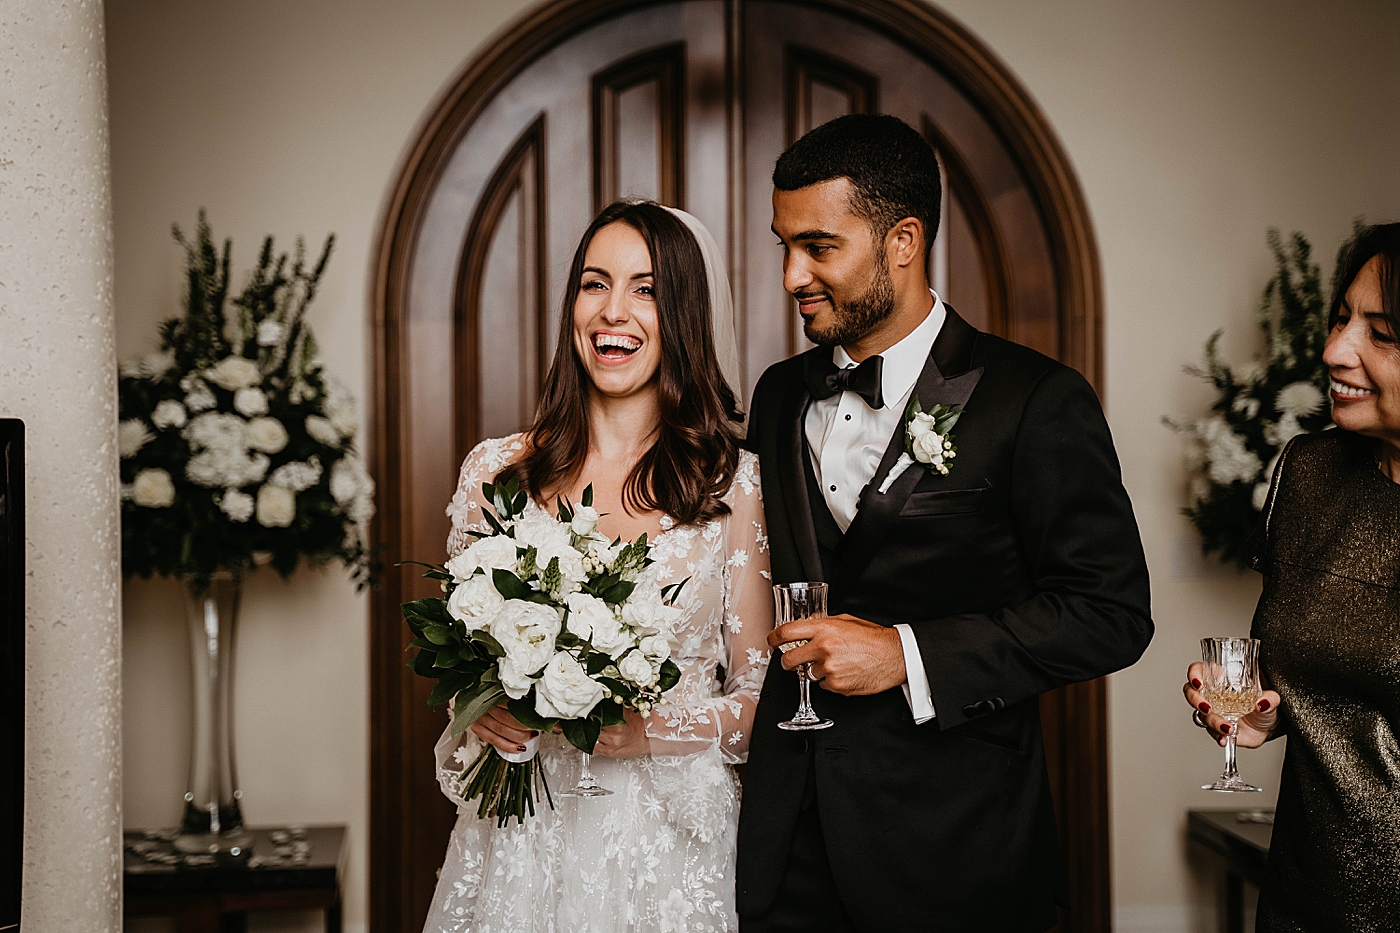 Happy Bride and Groom at the Reception Intimate Home Wedding captured by South Florida Wedding Photographer Krystal Capone Photography